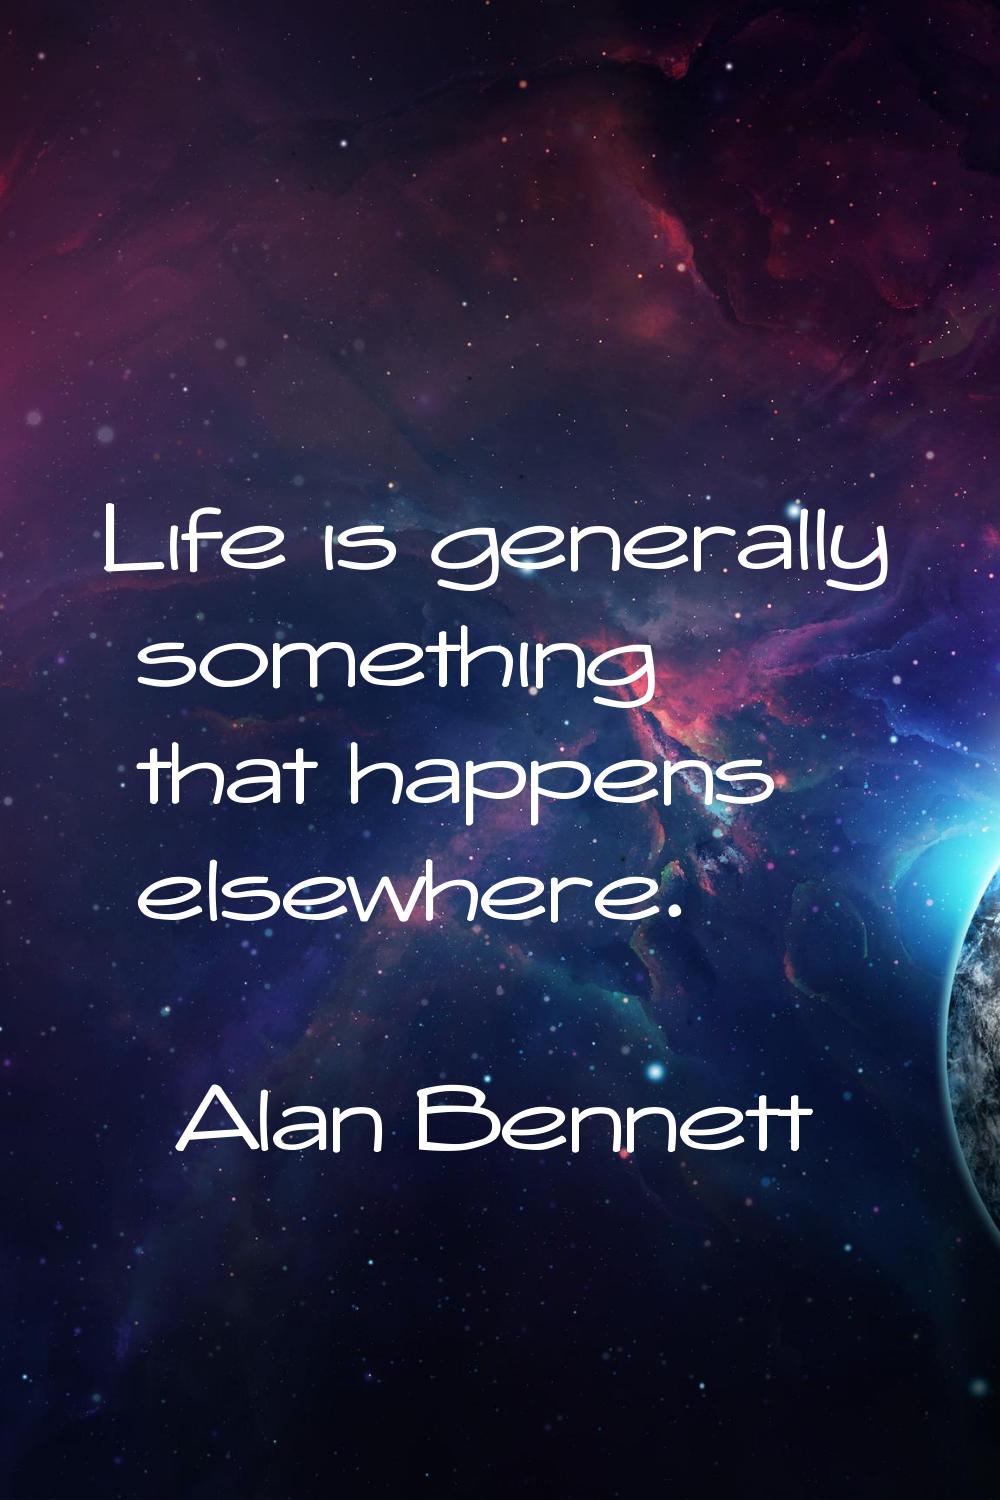 Life is generally something that happens elsewhere.